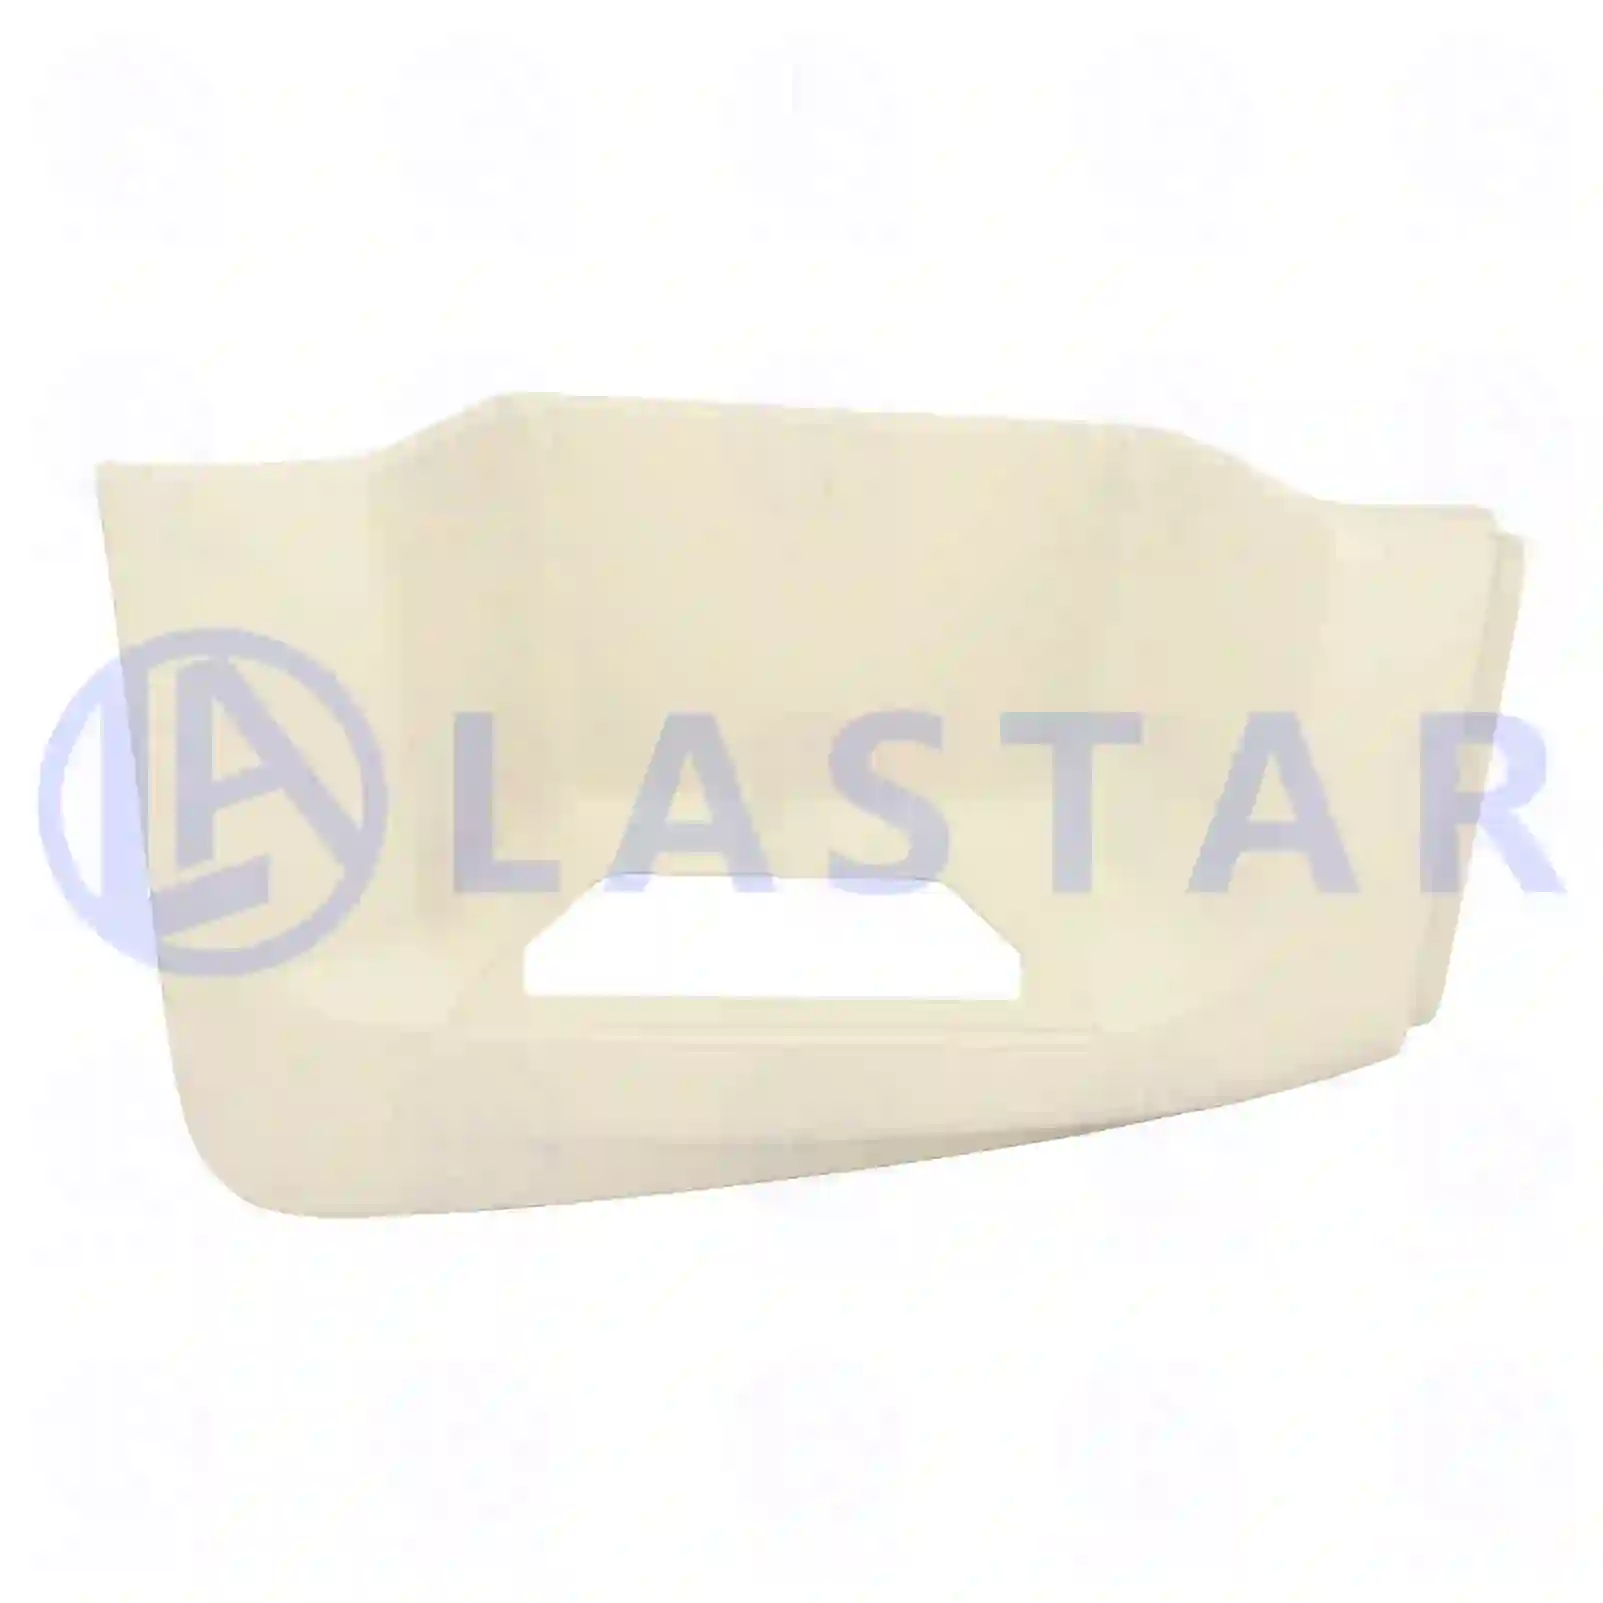 Step well case, right, white, 77719744, 1295735 ||  77719744 Lastar Spare Part | Truck Spare Parts, Auotomotive Spare Parts Step well case, right, white, 77719744, 1295735 ||  77719744 Lastar Spare Part | Truck Spare Parts, Auotomotive Spare Parts